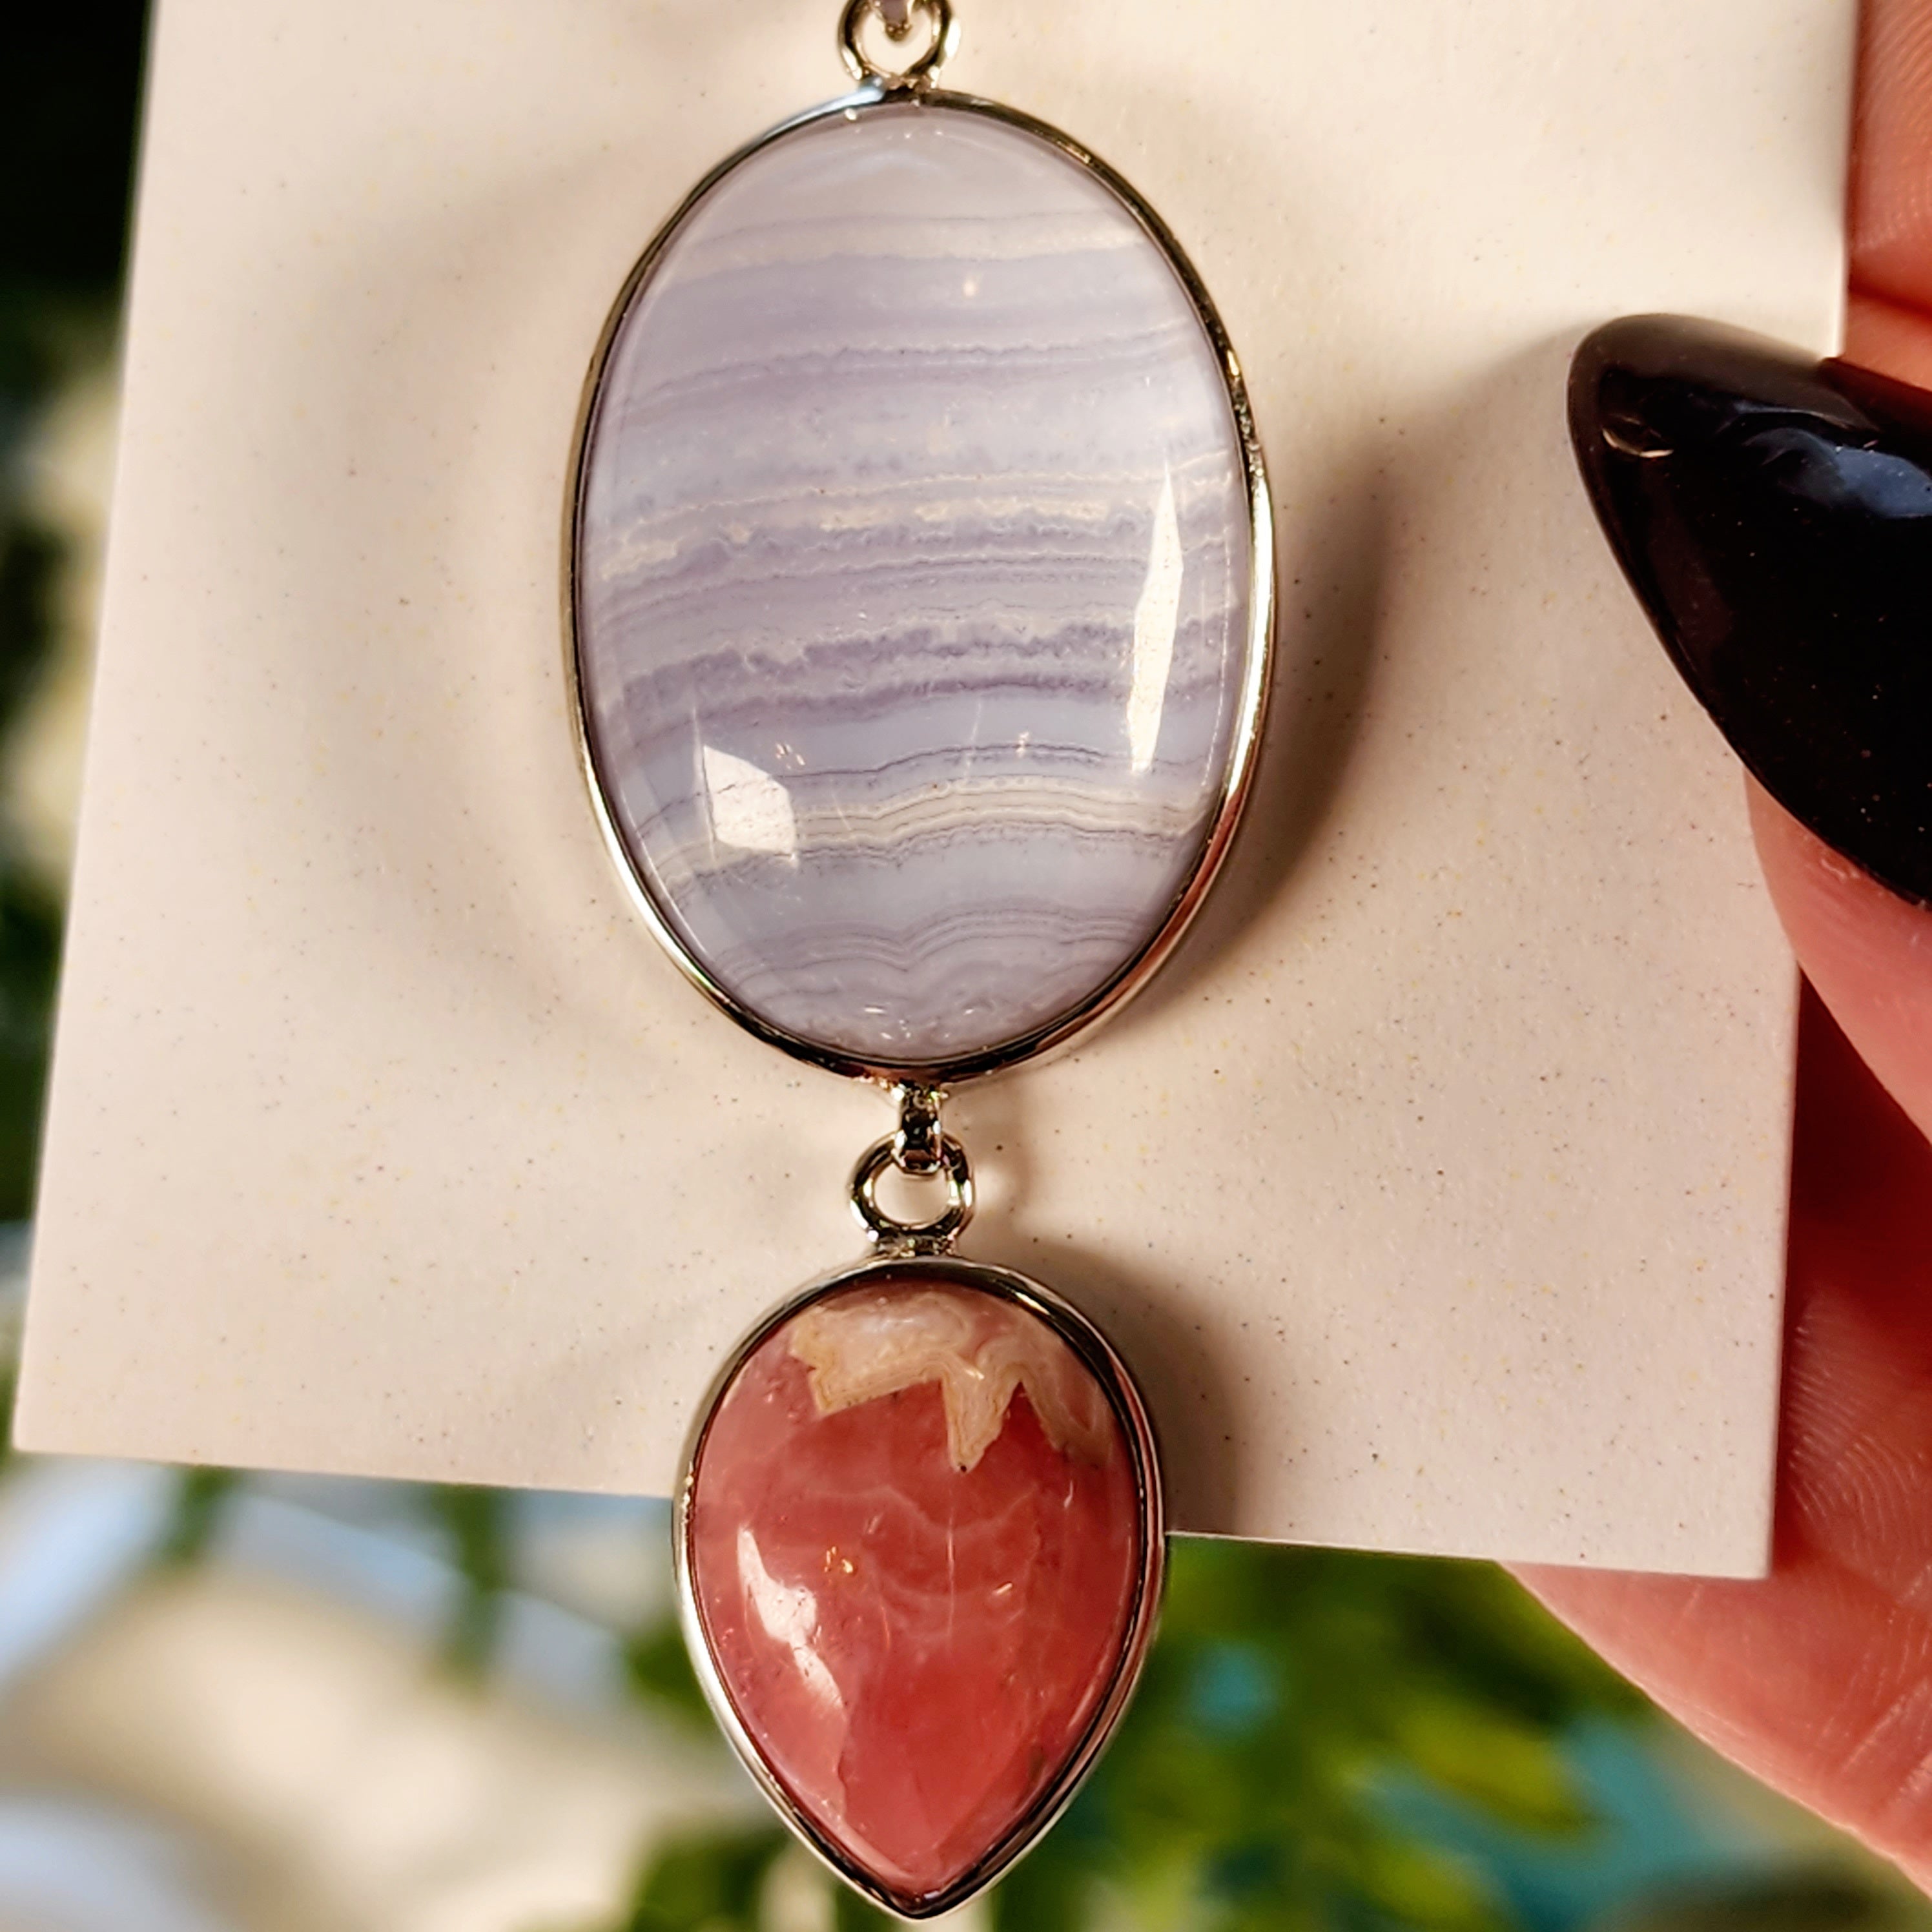 Blue Lace Agate x Rhodochrosite Pendant .925 Silver for Loving and Honest Communication